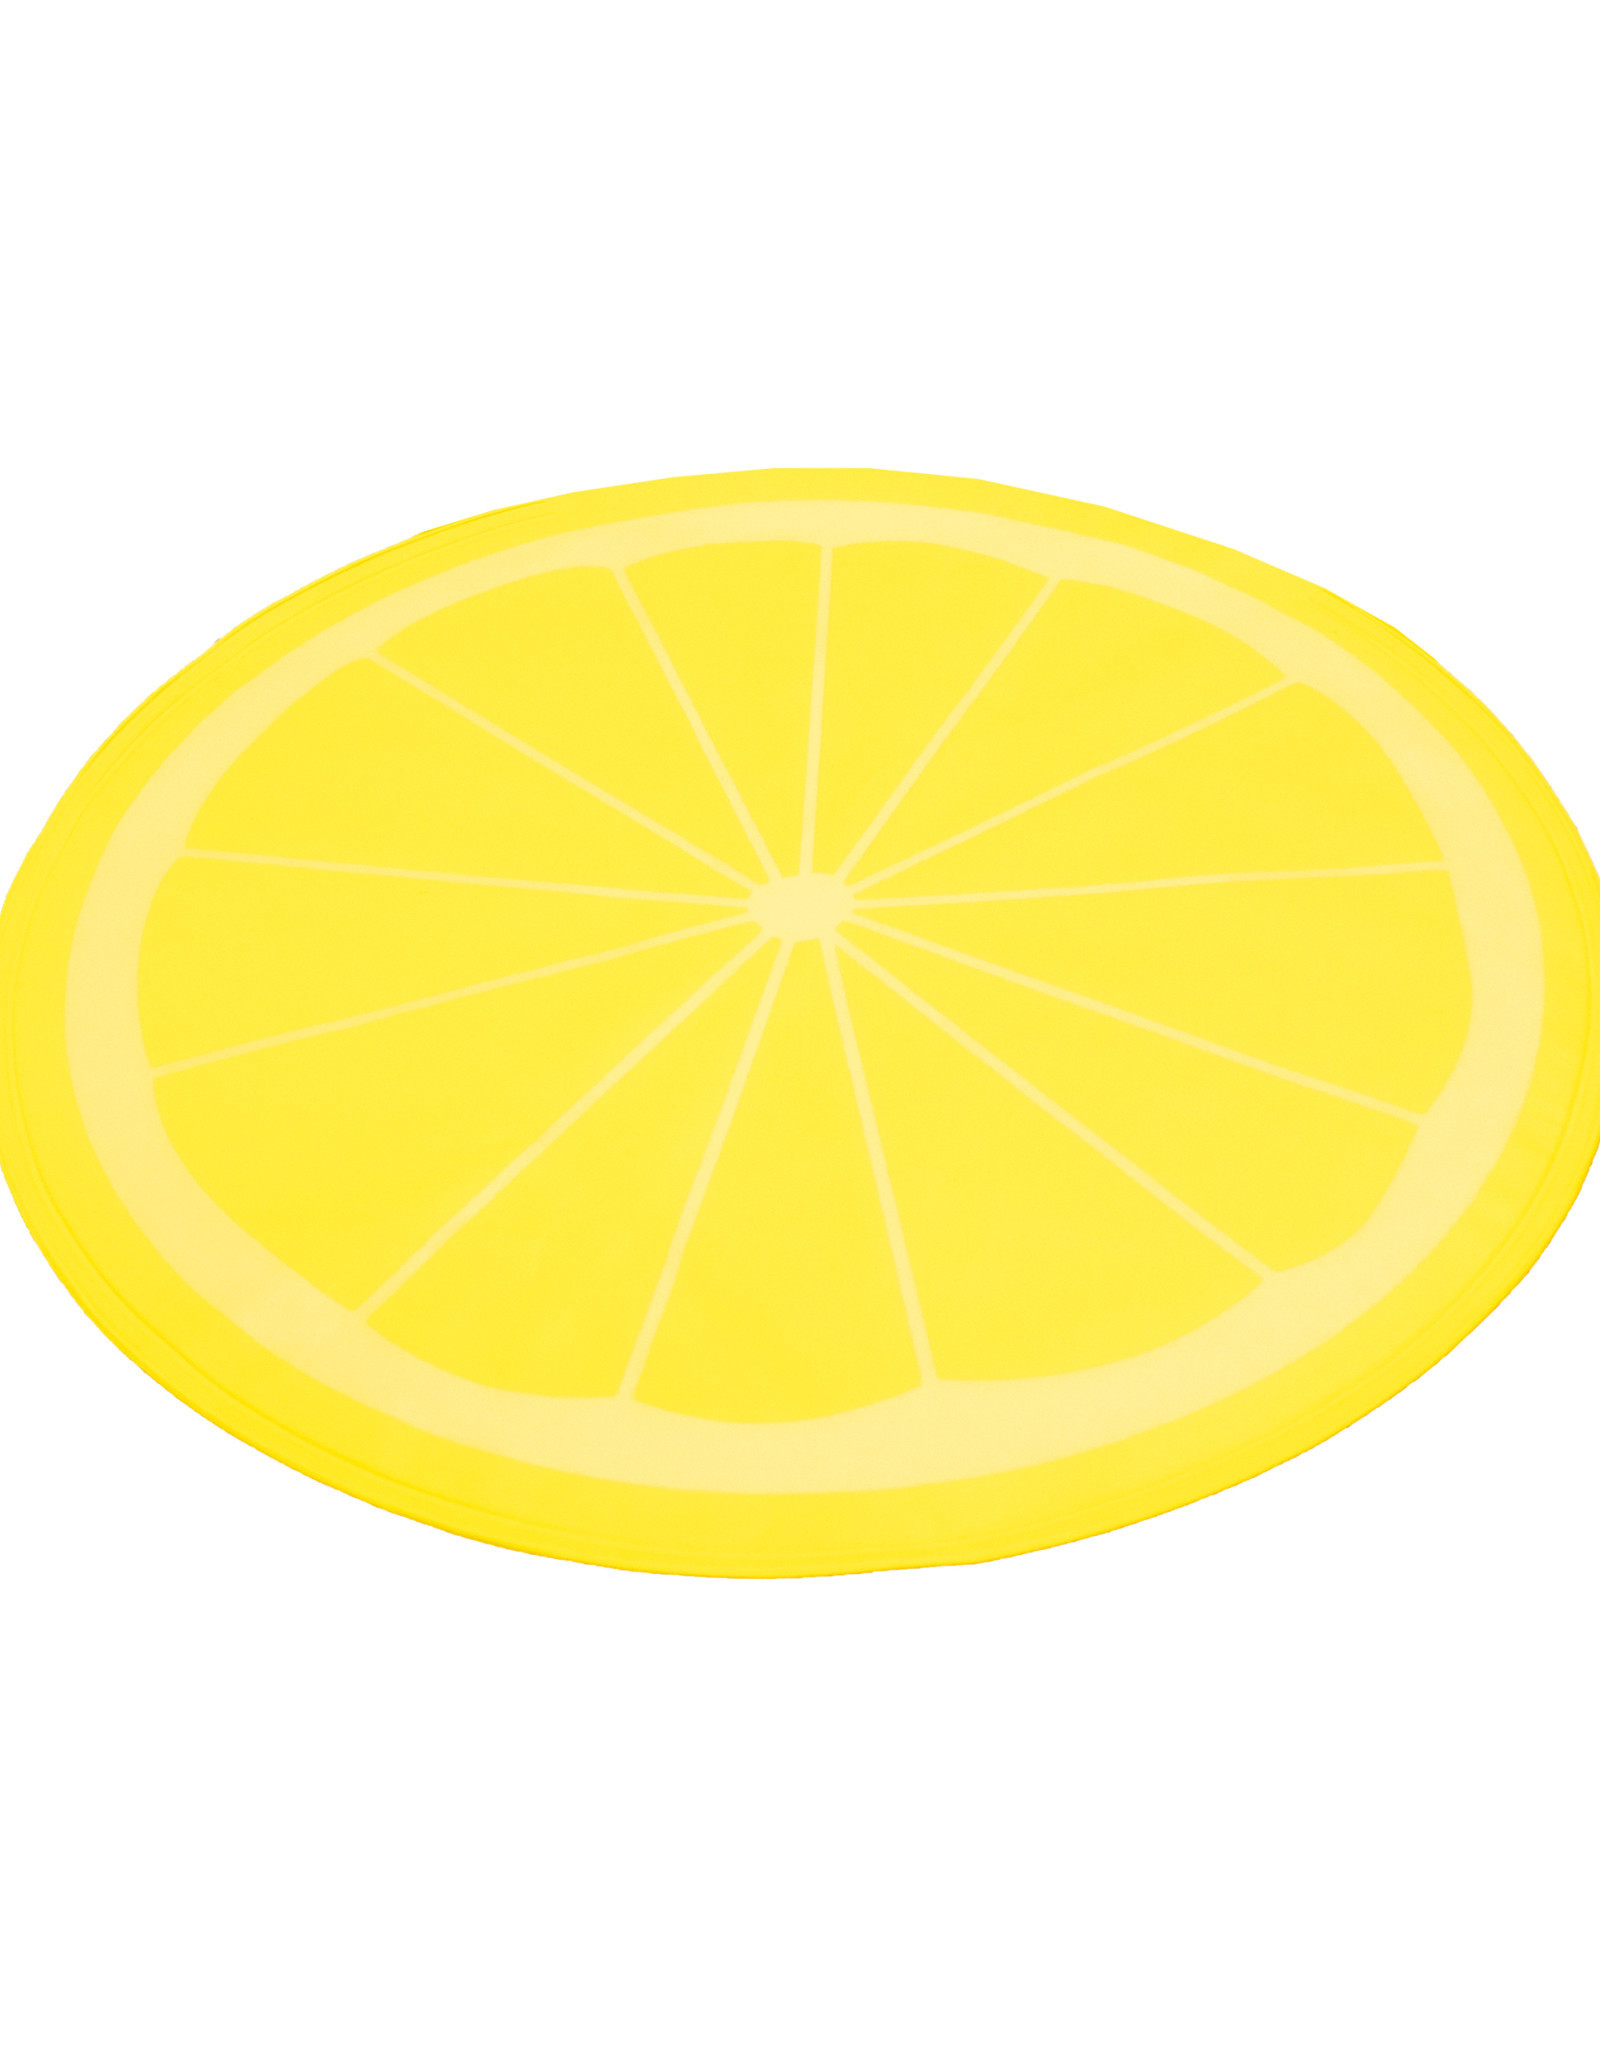 Lemons And Limes Mix Dog Pillow Luxury Dog Cat Pet Bed Please Be Sure To Check Out This Awesome Product This Is An Affiliat With Images Dog Pillow Luxury